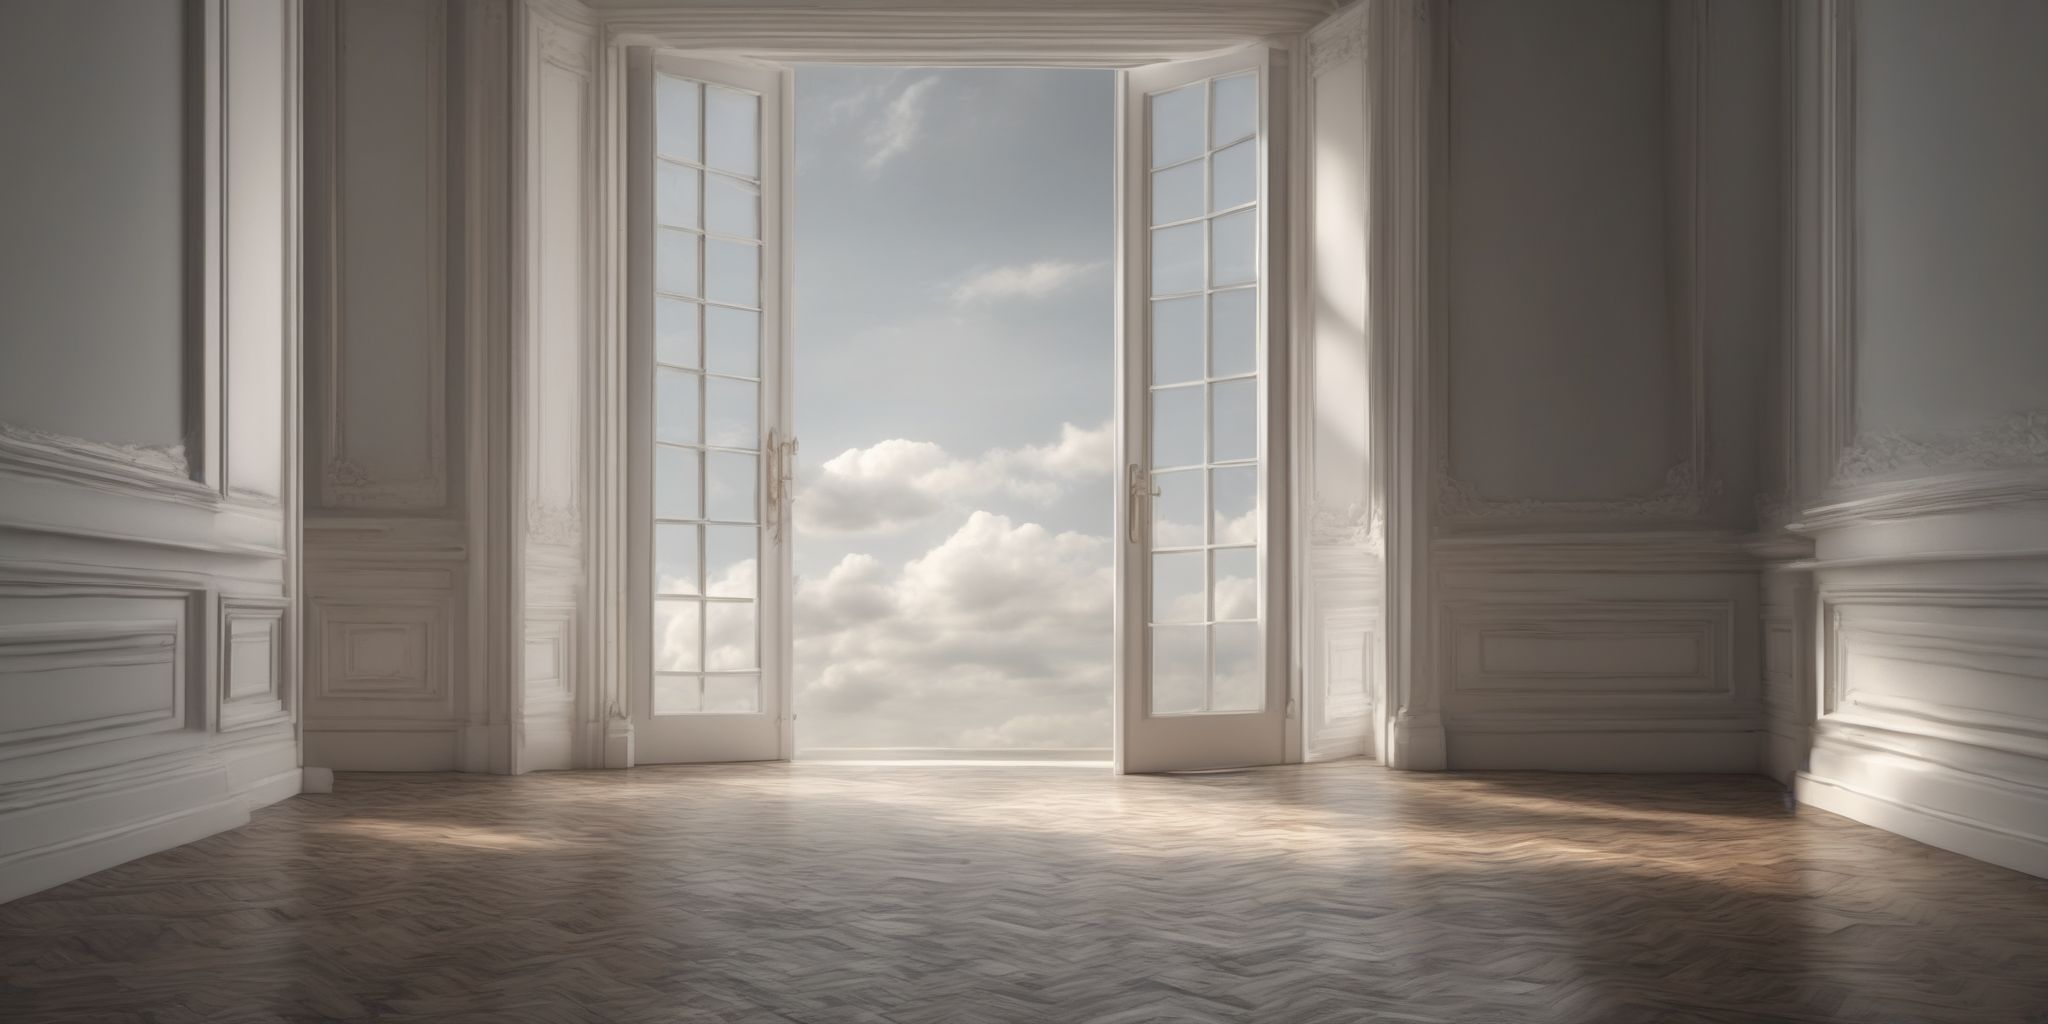 Threshold  in realistic, photographic style